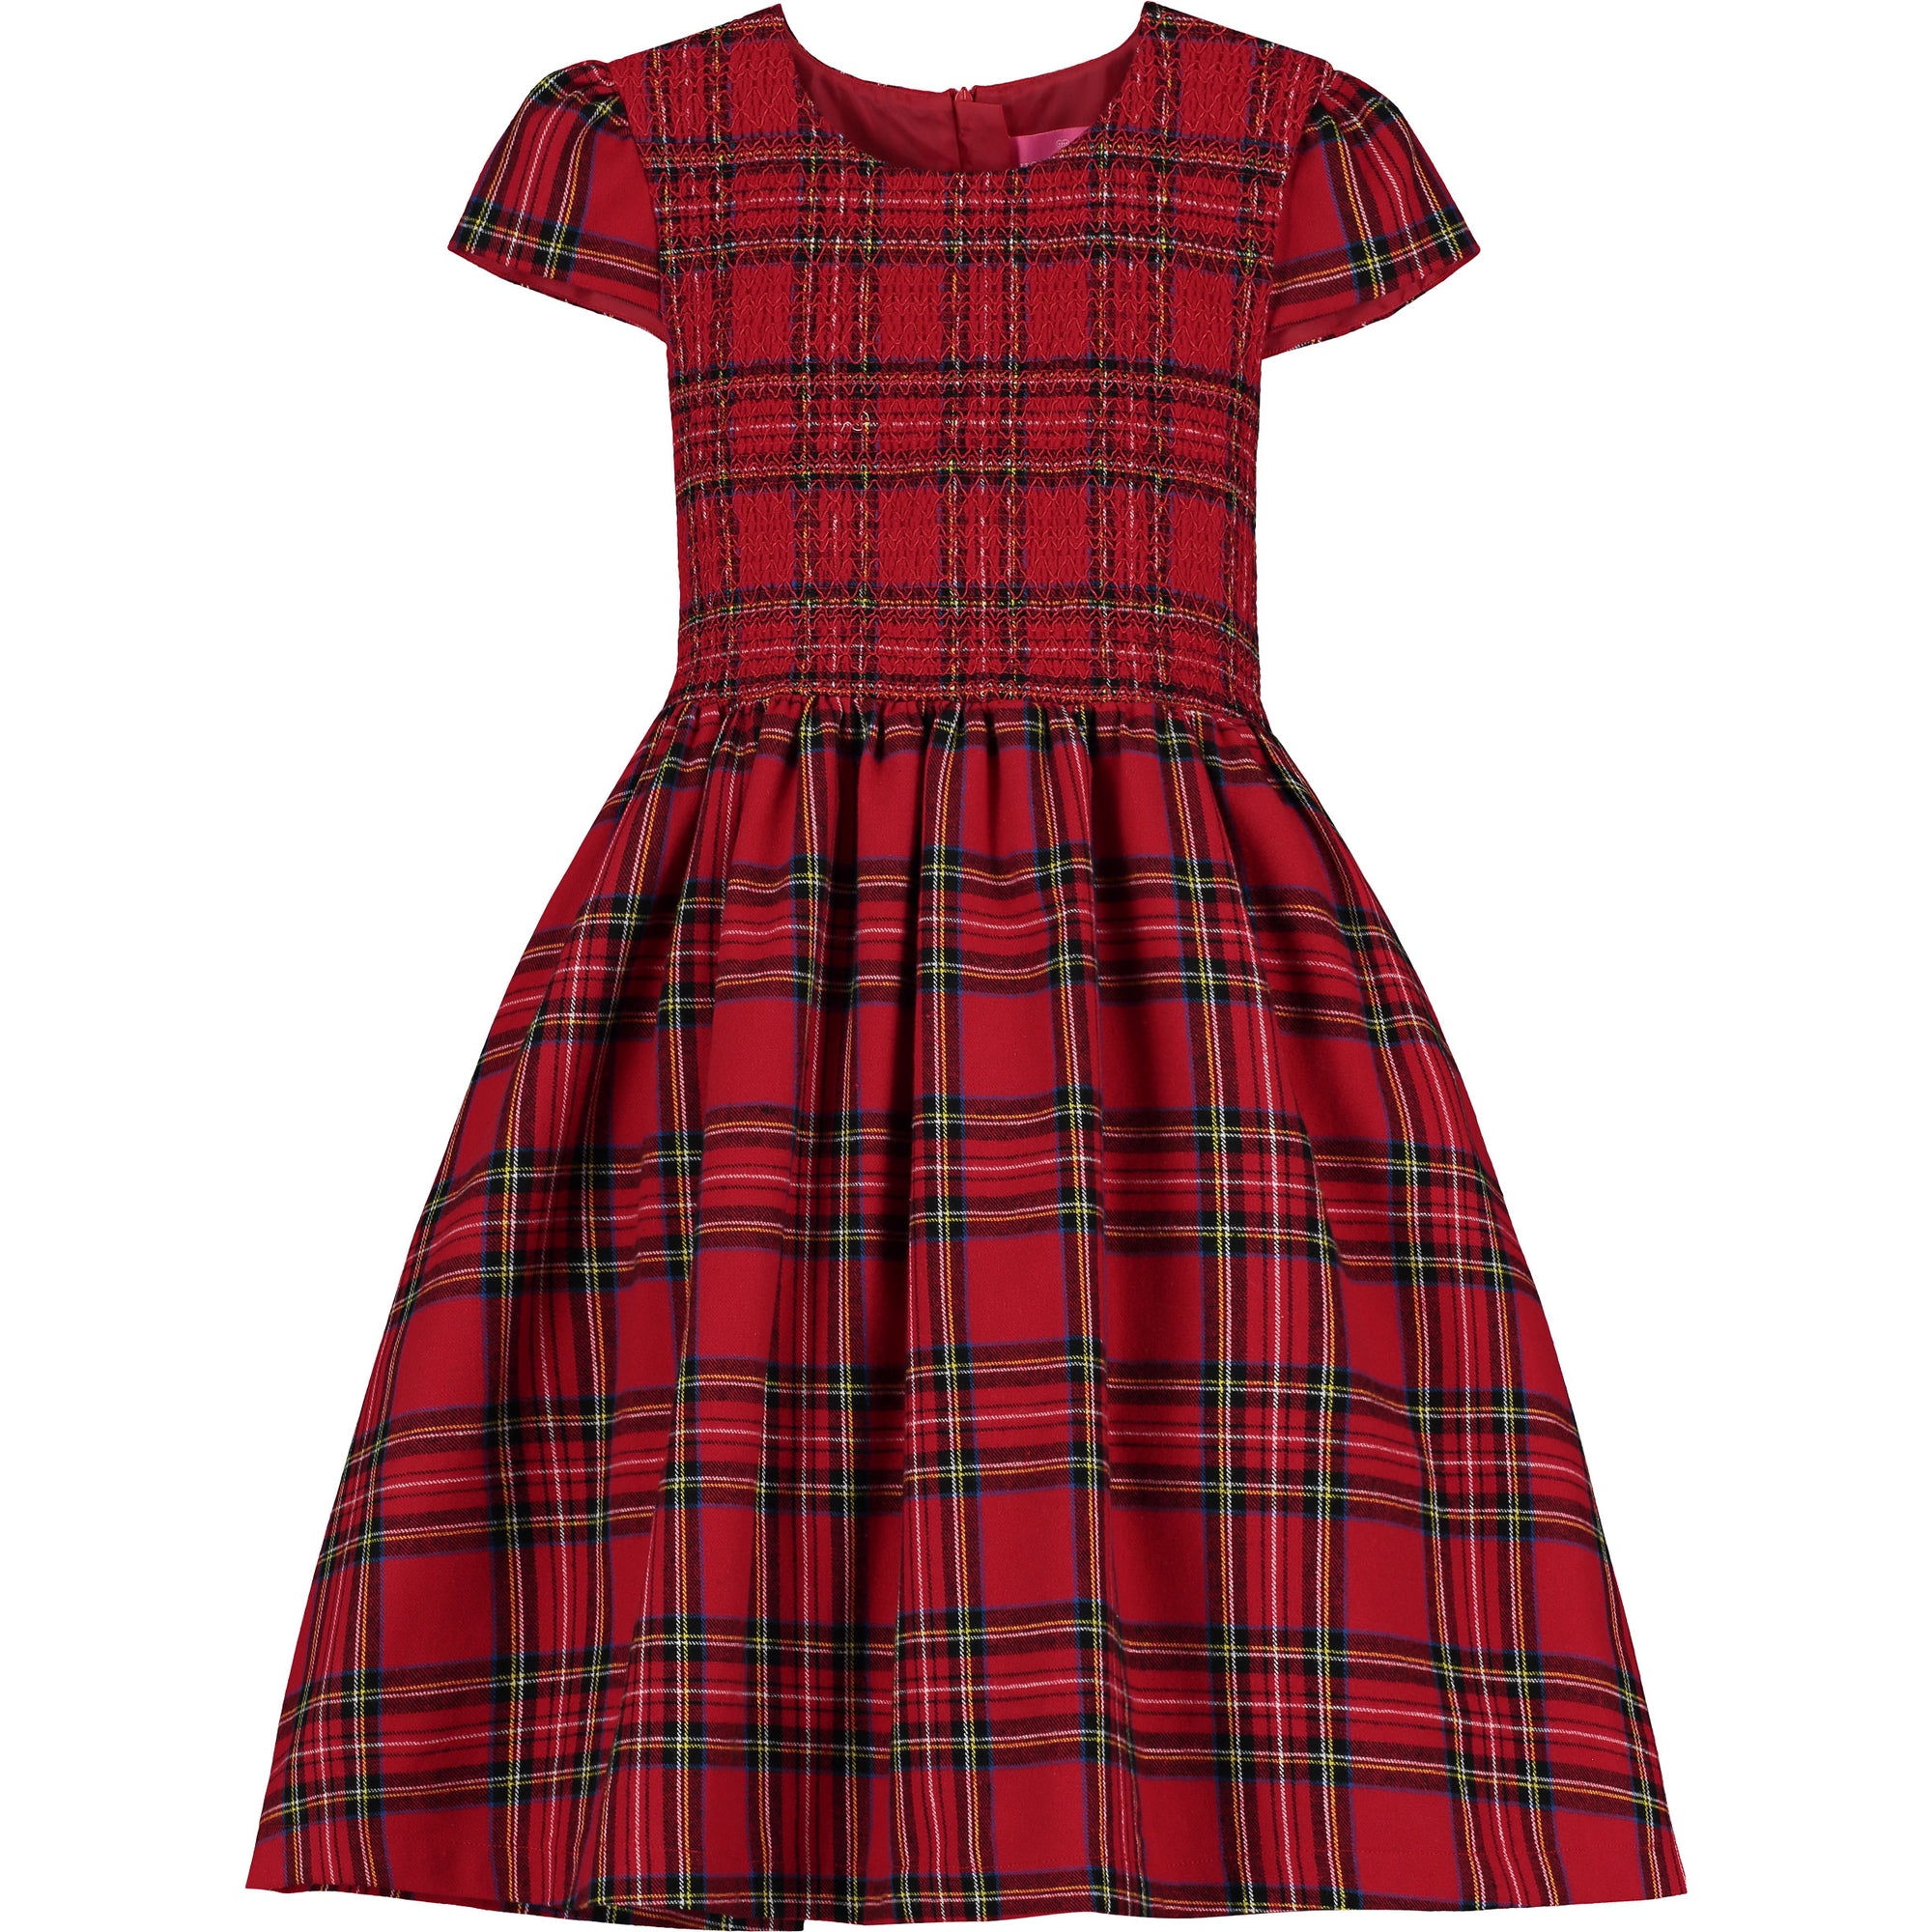 Holly Hastie Bonnie Red Plaid Girls Party Dress